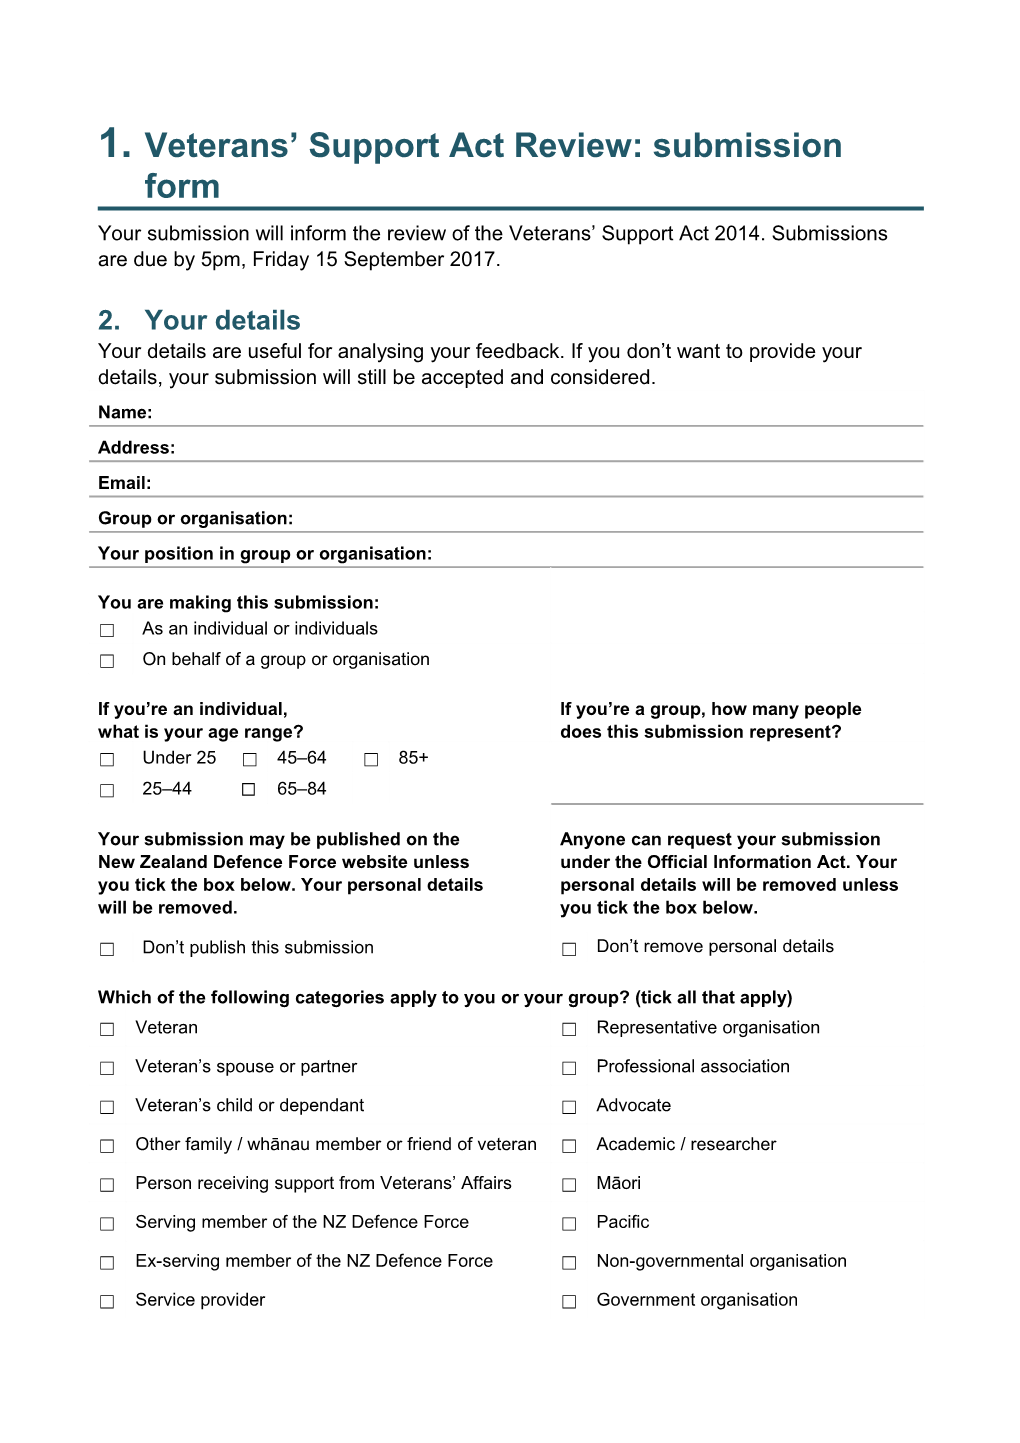 Veterans Support Act Review: Submission Form